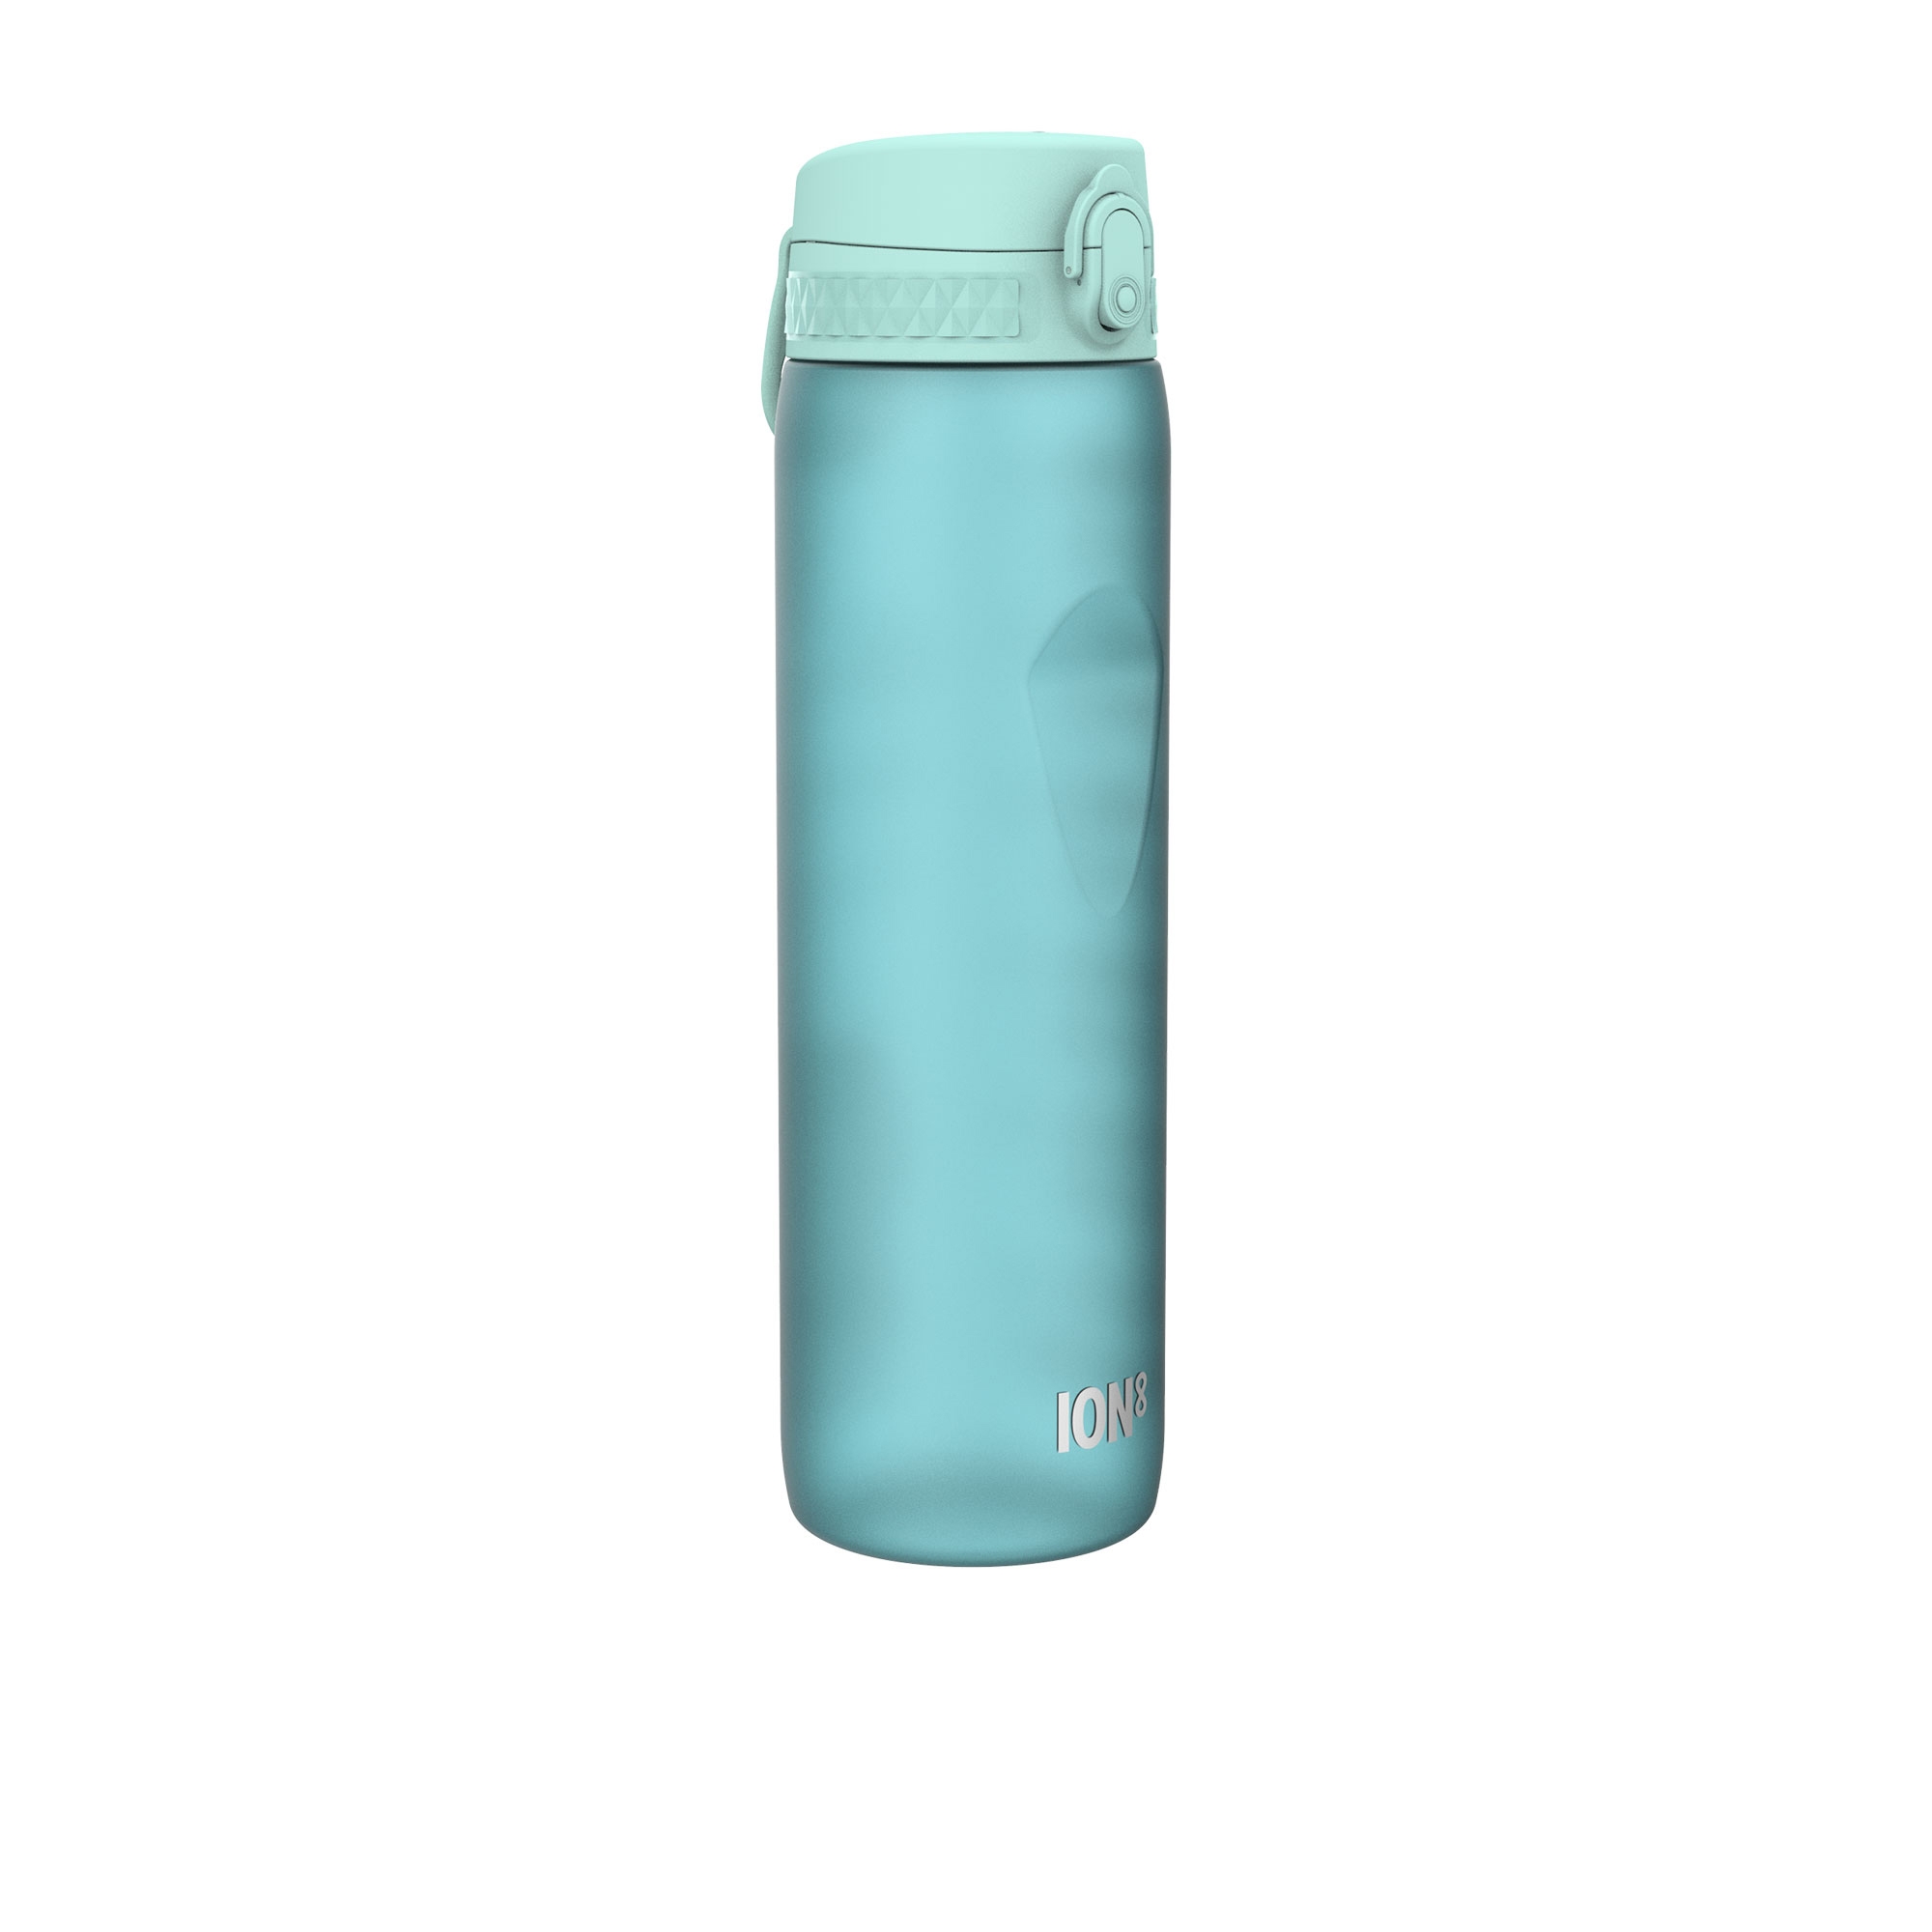 Ion8 Quench Recyclon Motivator Drink Bottle 1L Blue Image 1